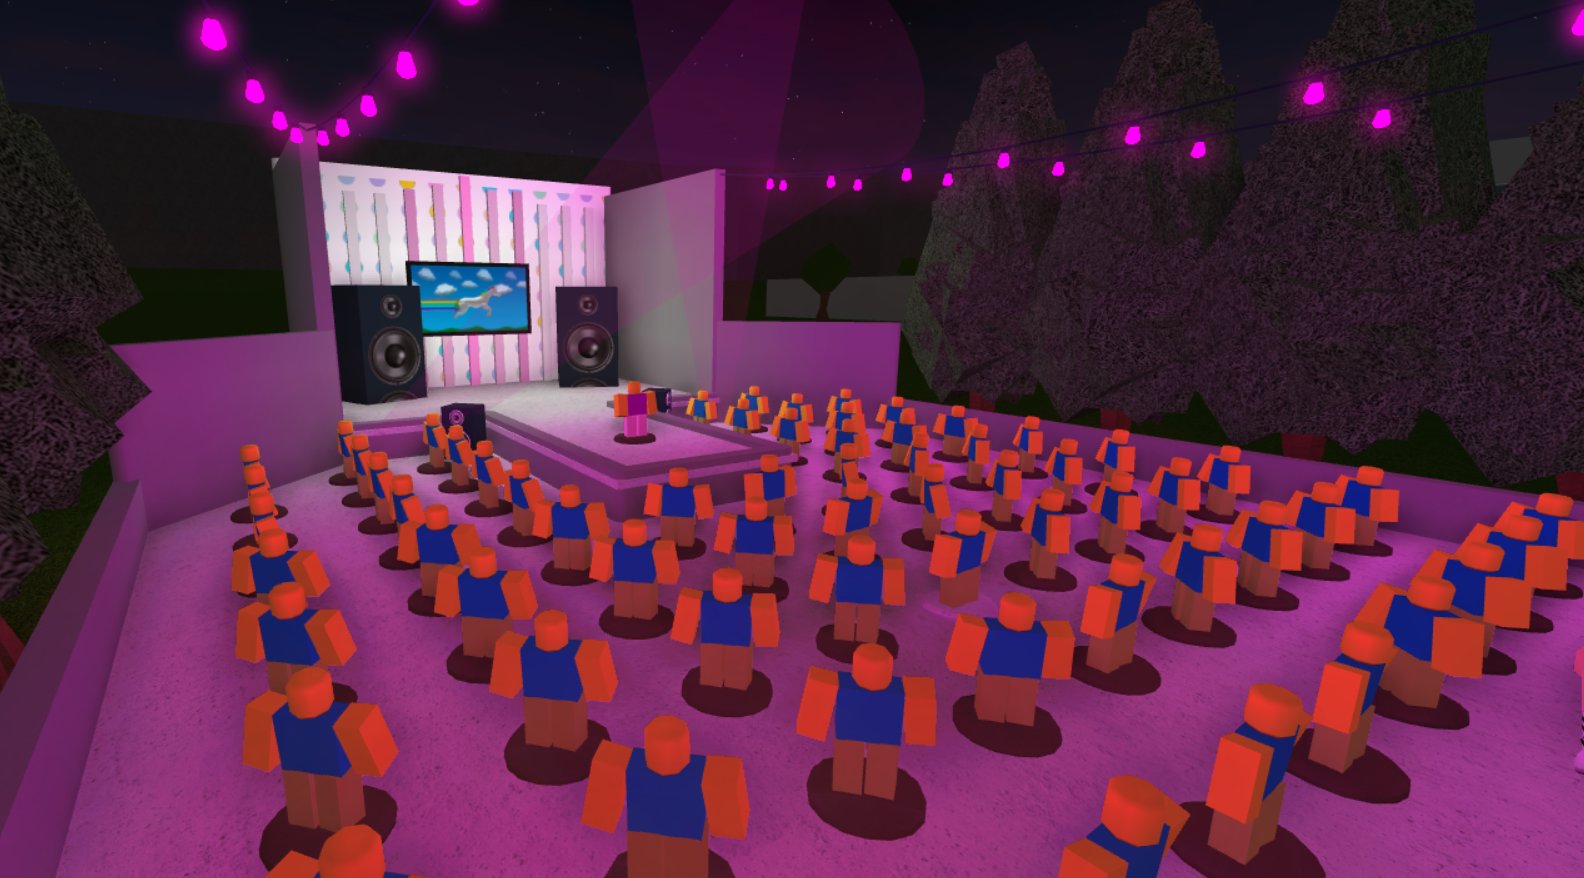 Tails On Twitter Join Coeptus As He Sings His Hit Song Oofish I Build A Mini Noob Concert With A Pink Kinda Vibe For The Bloxburgcompmusic And I Loved How It Turned - coeptus rbx coeptus twitter